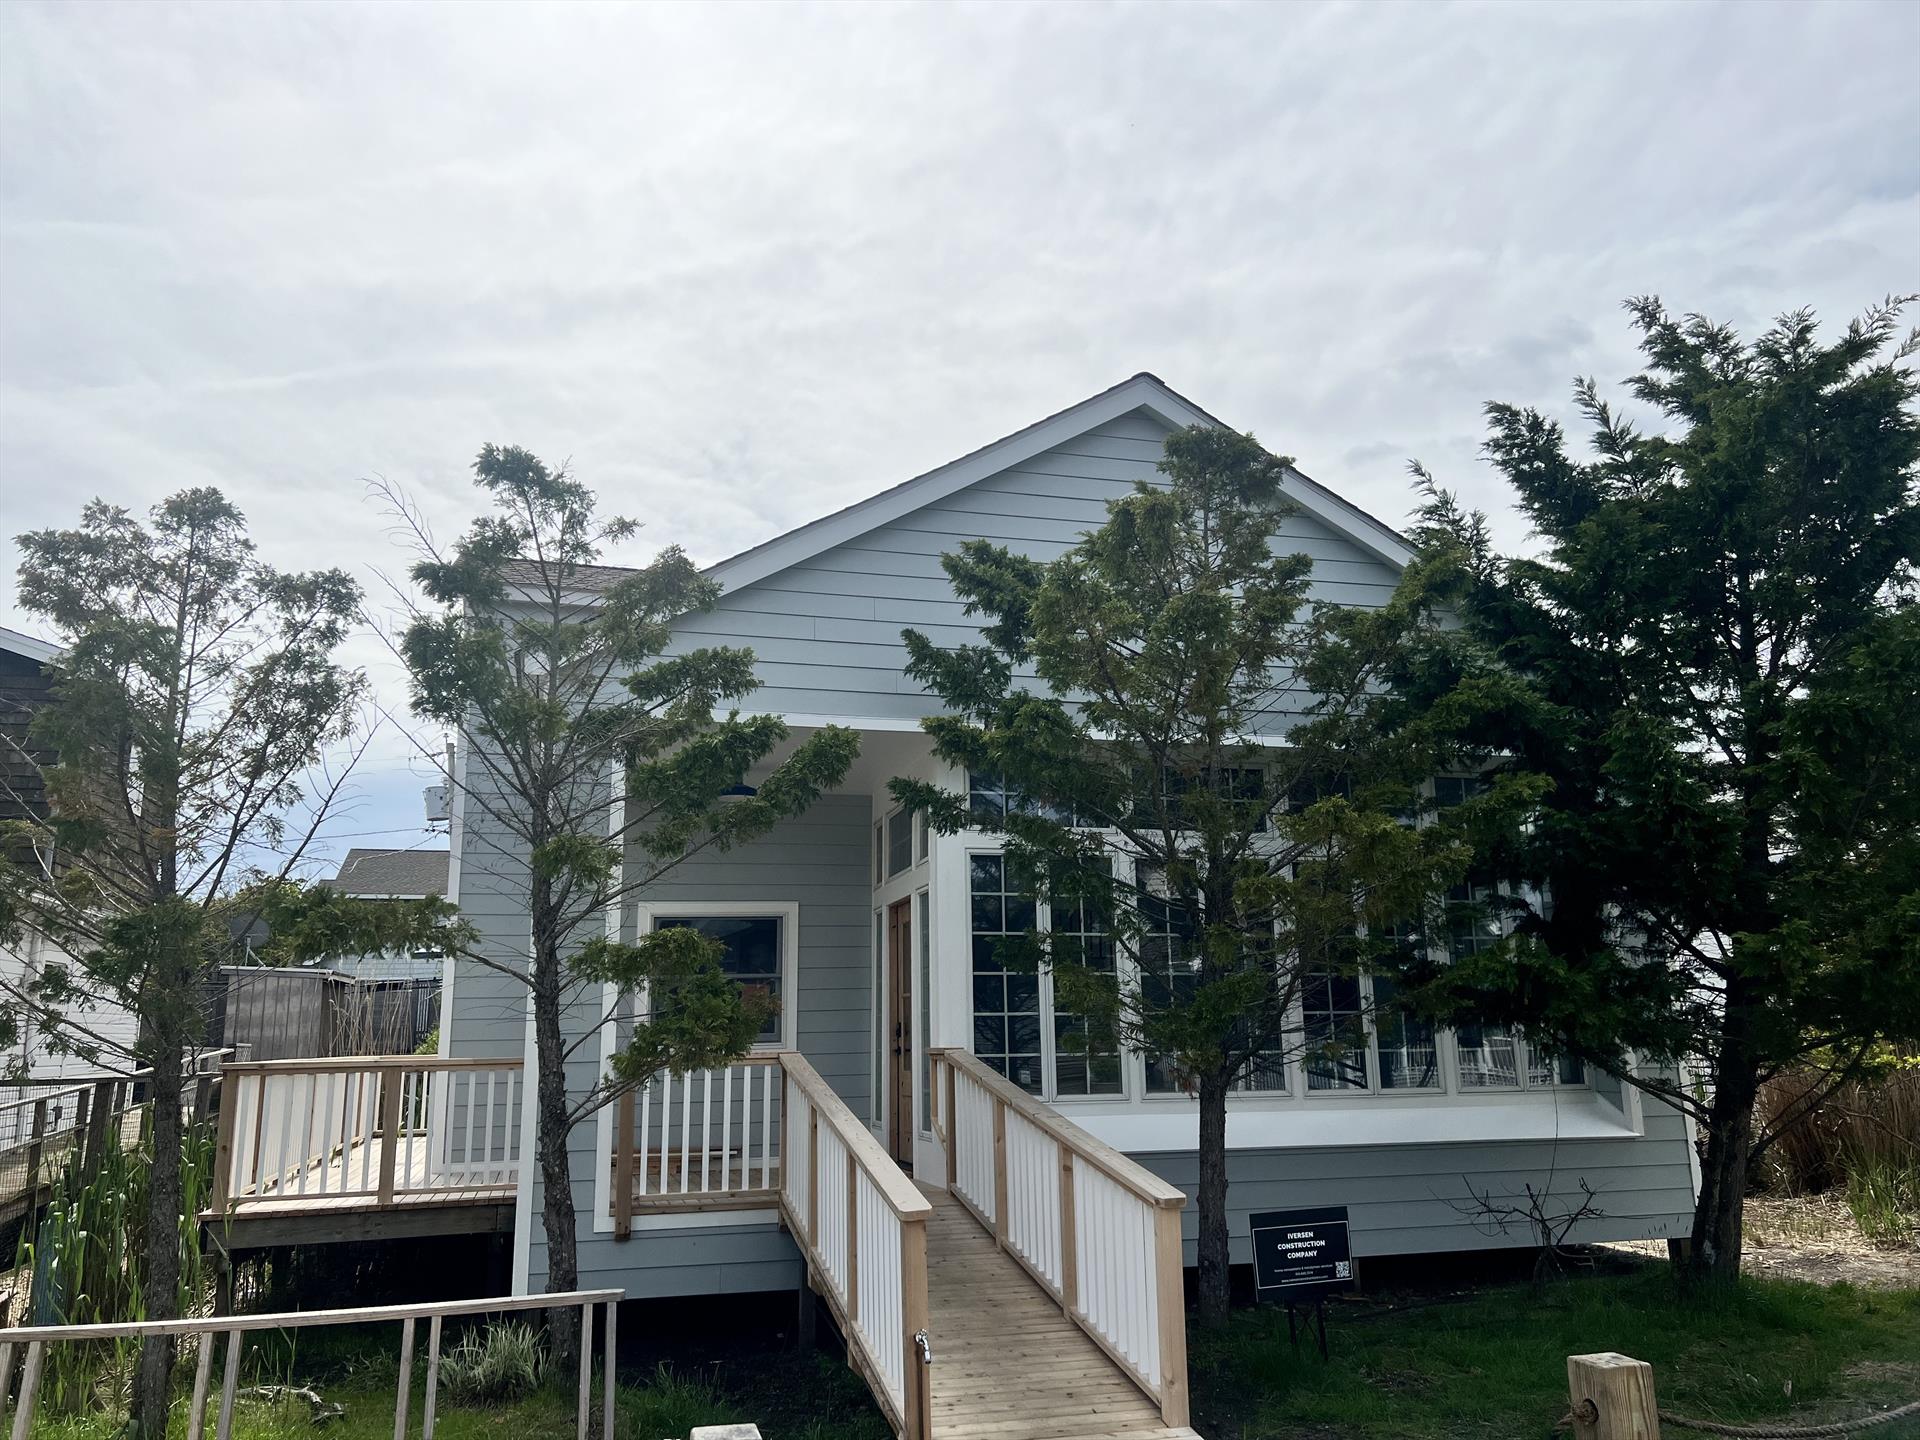 Situated on one of Ocean Beach’s most desirable streets, this completely renovated home is on an oversized 50’X104’ lot.  With 2,020 SF of living space, 4 bedrooms plus an office/flex space, and 3 full bathrooms, 310 Wilmot has plenty of room for your whole crew!  From the covered entry porch to the inviting sunroom, this home’s charms are immediately evident.  Continue on into the spectacular, sun-flooded great room to appreciate the beautiful soaring ceilings and airy, wide open space.  Completely redone from top to bottom, this home features all new roof, siding, decking, HVAC, and flooring.  The all new Hardie plank siding is fire, weather, and insect resistant so you can spend your time at the beach relaxing rather than worrying about the upkeep of your home.  The brand new kitchen has ample storage, gorgeous GE Cafe appliances, an island with breakfast bar, and quartz countertops.  Rounding out the first floor are 3 spacious bedrooms (one of which is a “mini master” with its own en-suite bathroom), laundry, large hall bath, and storage area.  The second floor of the home is dedicated to the enormous primary suite.  With soaring gabled ceilings, walls of closets, spacious en-suite bathroom with dual sinks & custom walk-in shower, and your own private terrace overlooking the pool area, this suite has it all.  The flex space on the second floor is perfect for a gym, office, art studio, or whatever your heart desires.
The outdoor space in this home is just as fabulous as the indoors, with a large back deck featuring a Saltwater swimming pool, outdoor kitchen with grill, sink, and fridge, dining area with built-in banquette, and ample room to lounge.  No Fire Island house would be complete without it’s outdoor shower!  Enjoy your deck in the privacy afforded by 6’ cedar slat privacy fencing around the pool deck.  Shown by appointment only, 310 Wilmot has it all!